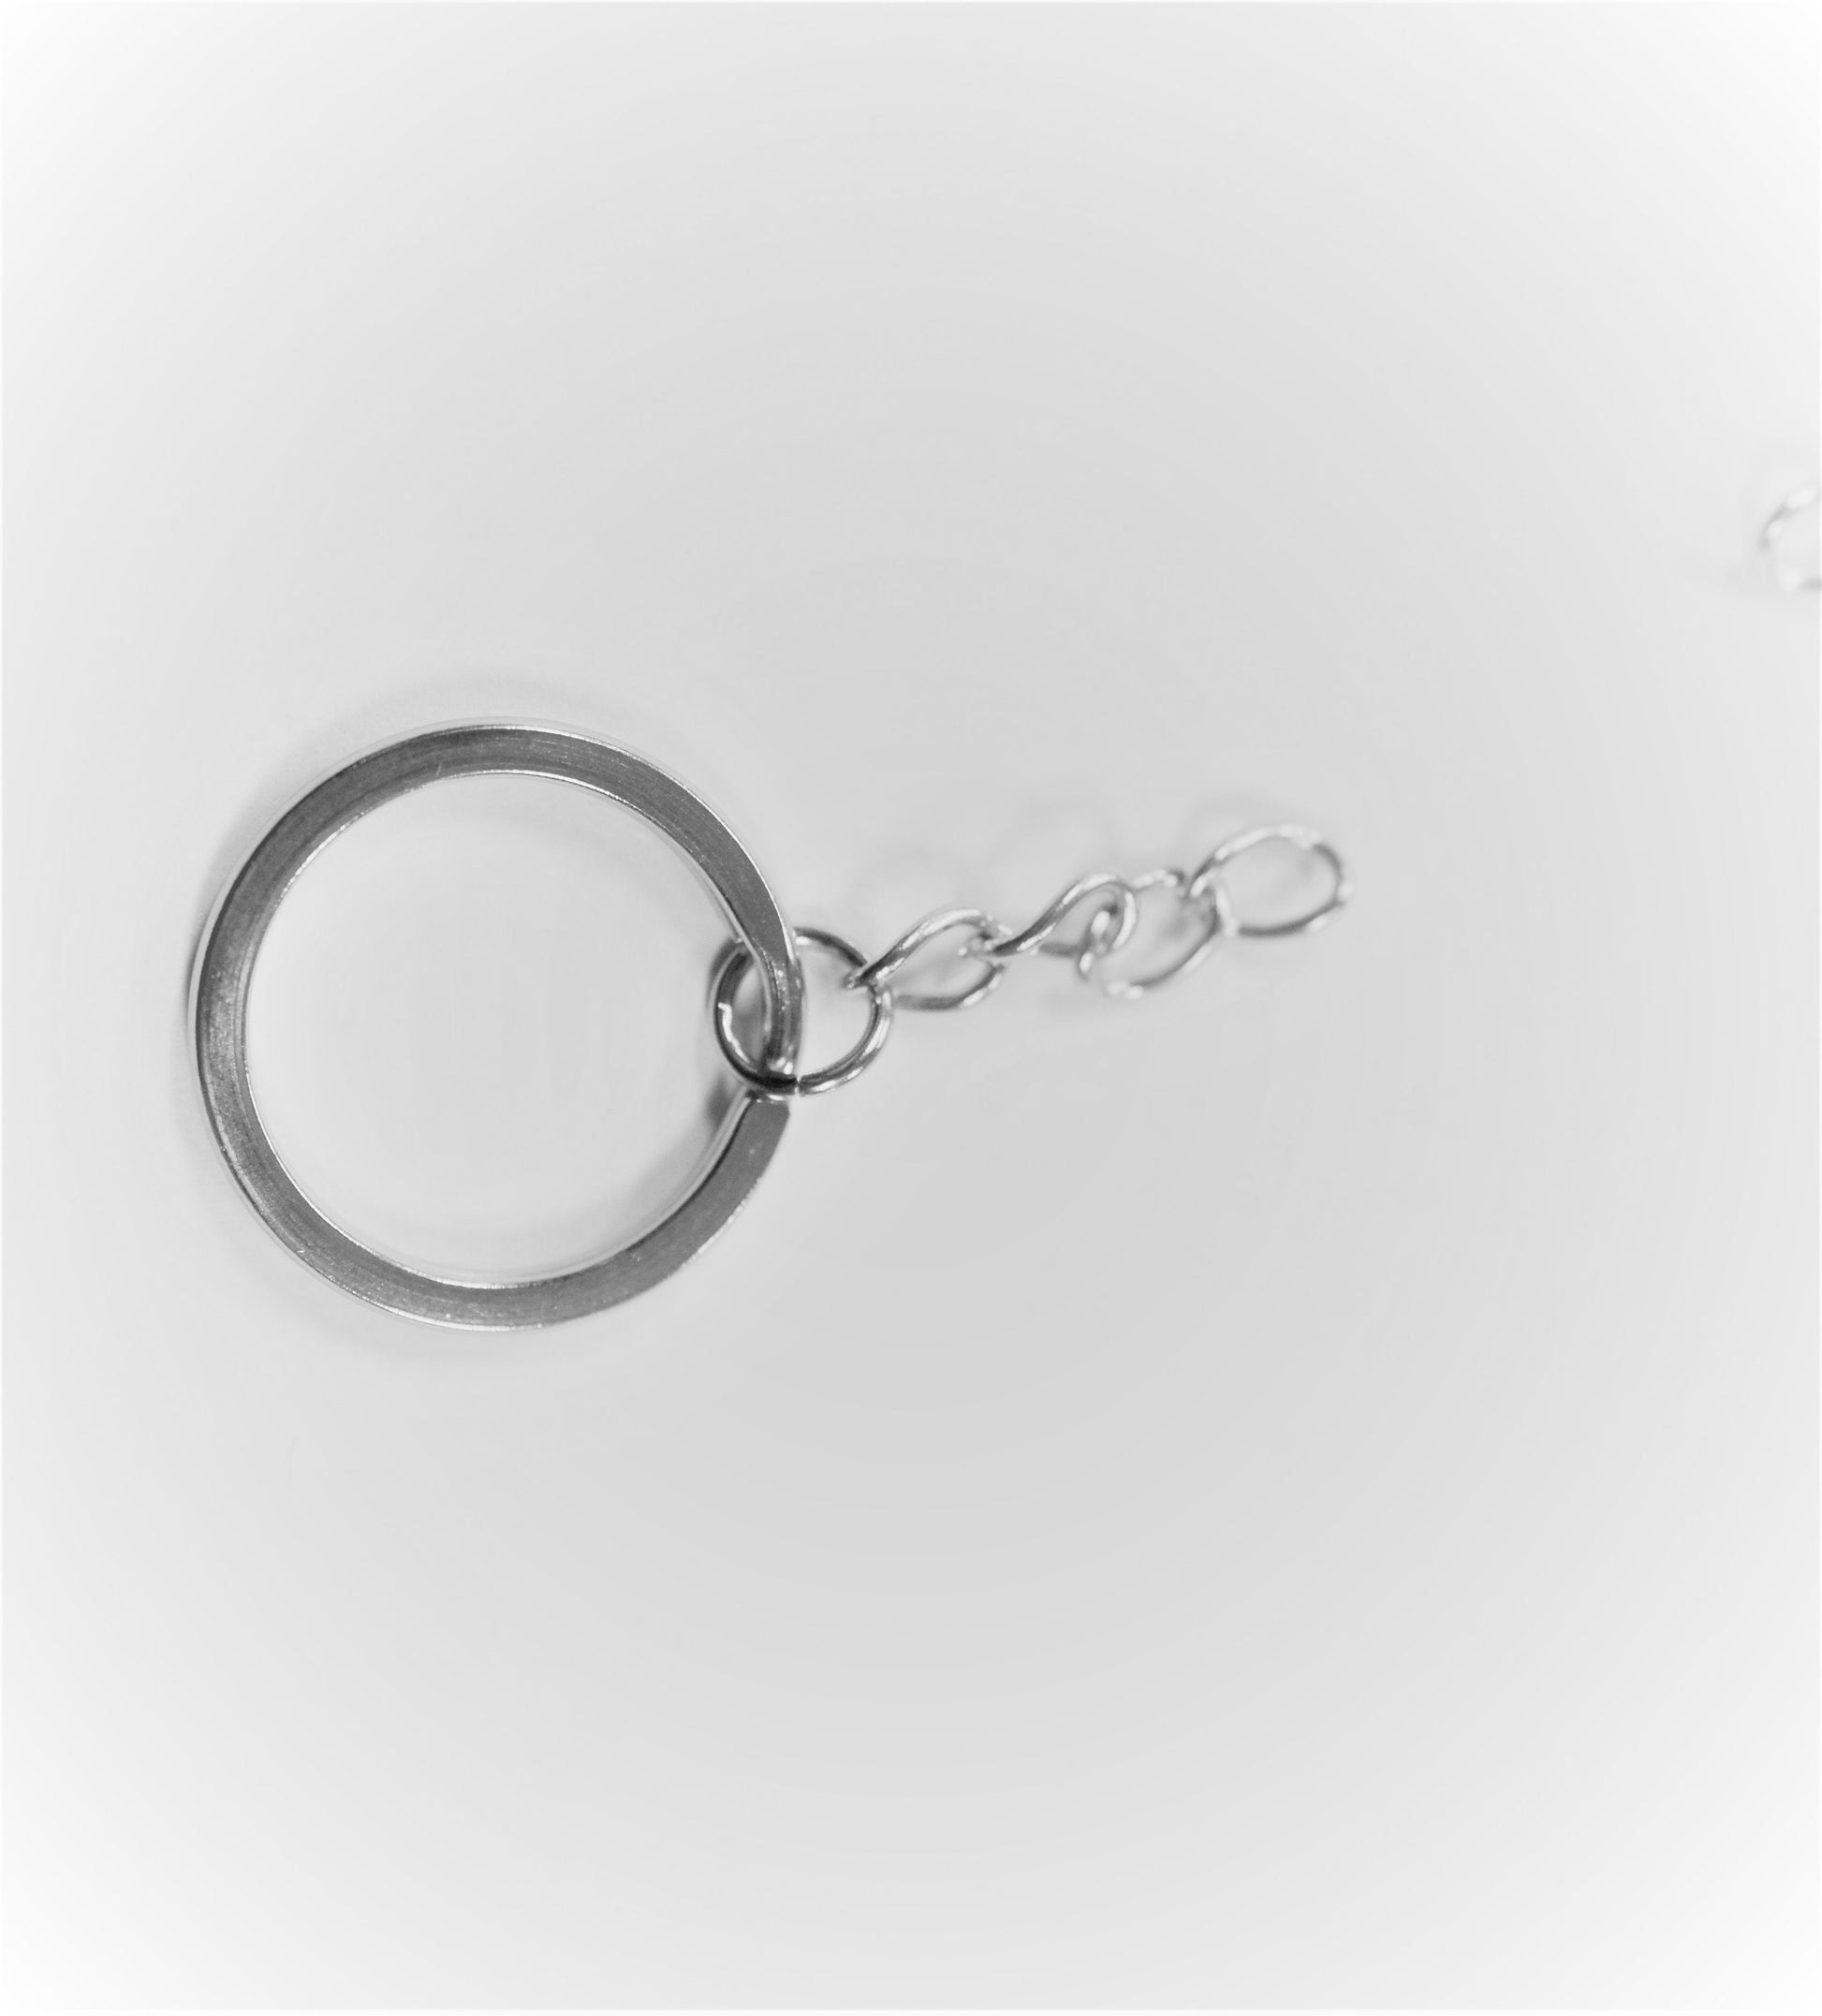 Plain Stainless Steel Hook Key Chain and extension 20mm double round ring For Jewelry supplier 2mm thickness wholesale keychain